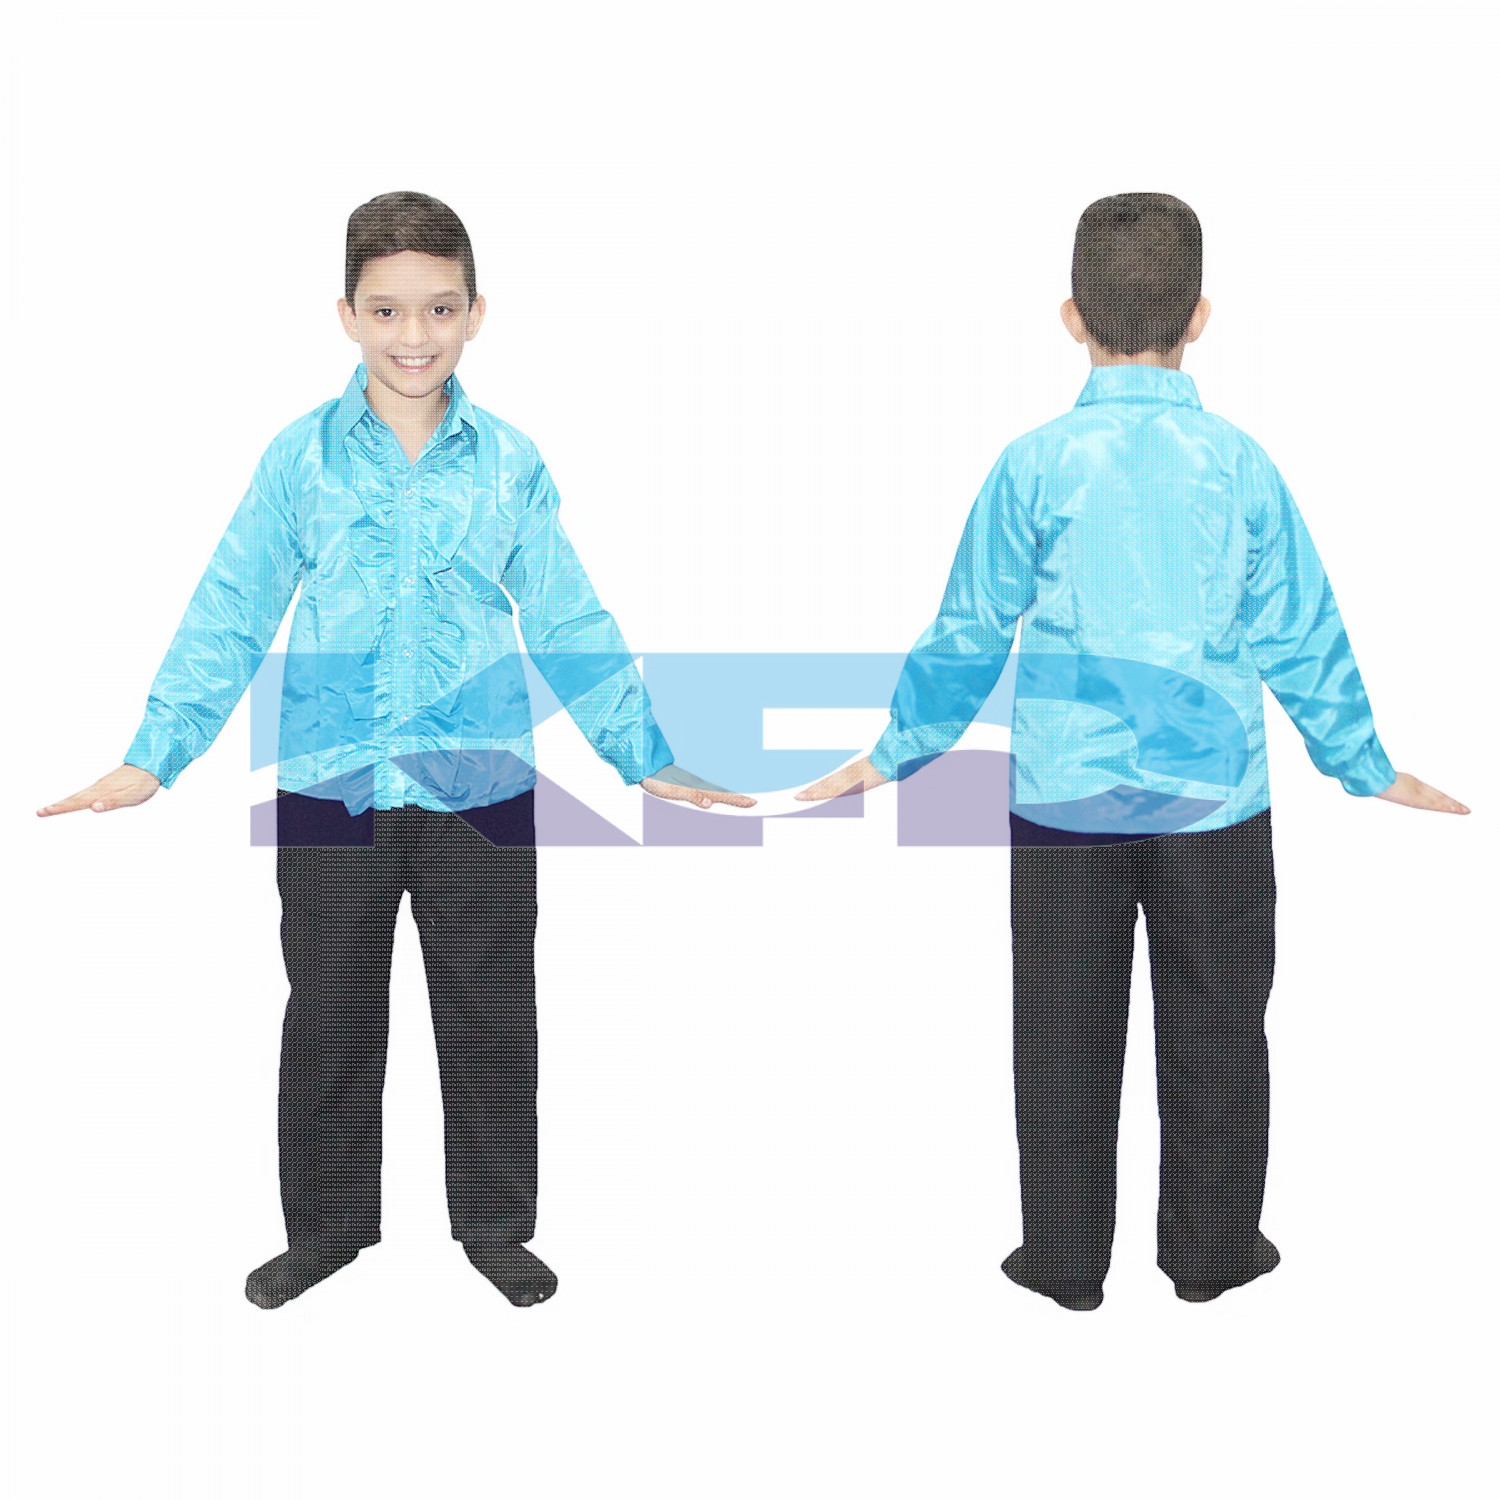 Firozi Frill Shirt fancy dress for kids,Western Costume for Annual function/Theme Party/Competition/Stage Shows/Birthday Party Dress laten dance/salsa dance